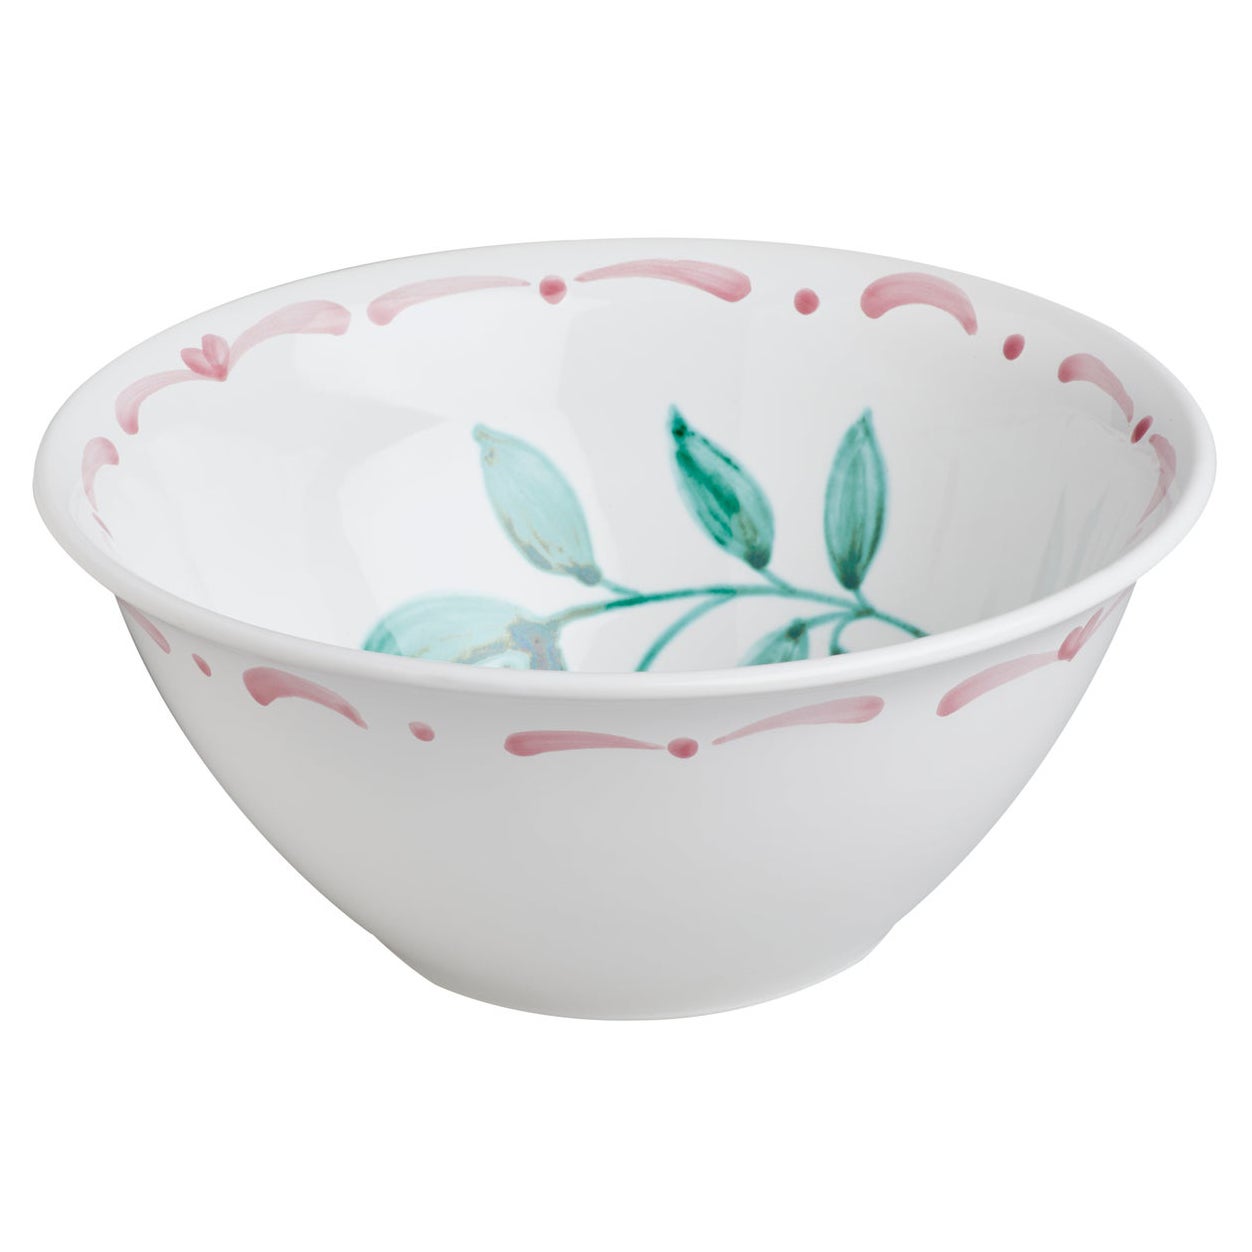 Country Style Salad Bowl Hand-Painted Ceramic Sofina Boutique Kitzbühel